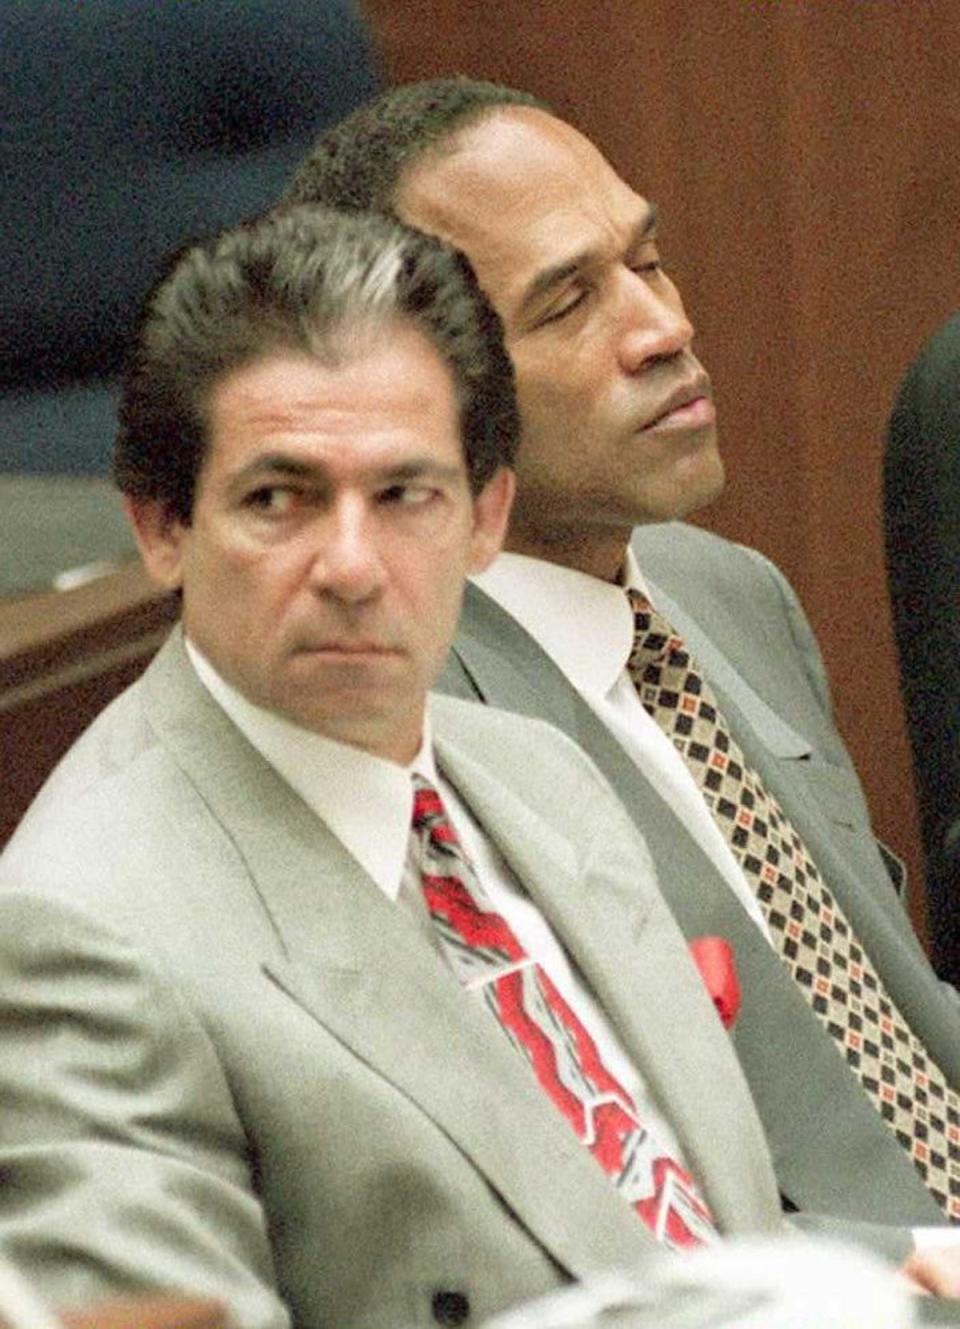 Robert Kardashian pictured in 1994 (AFP via Getty Images)